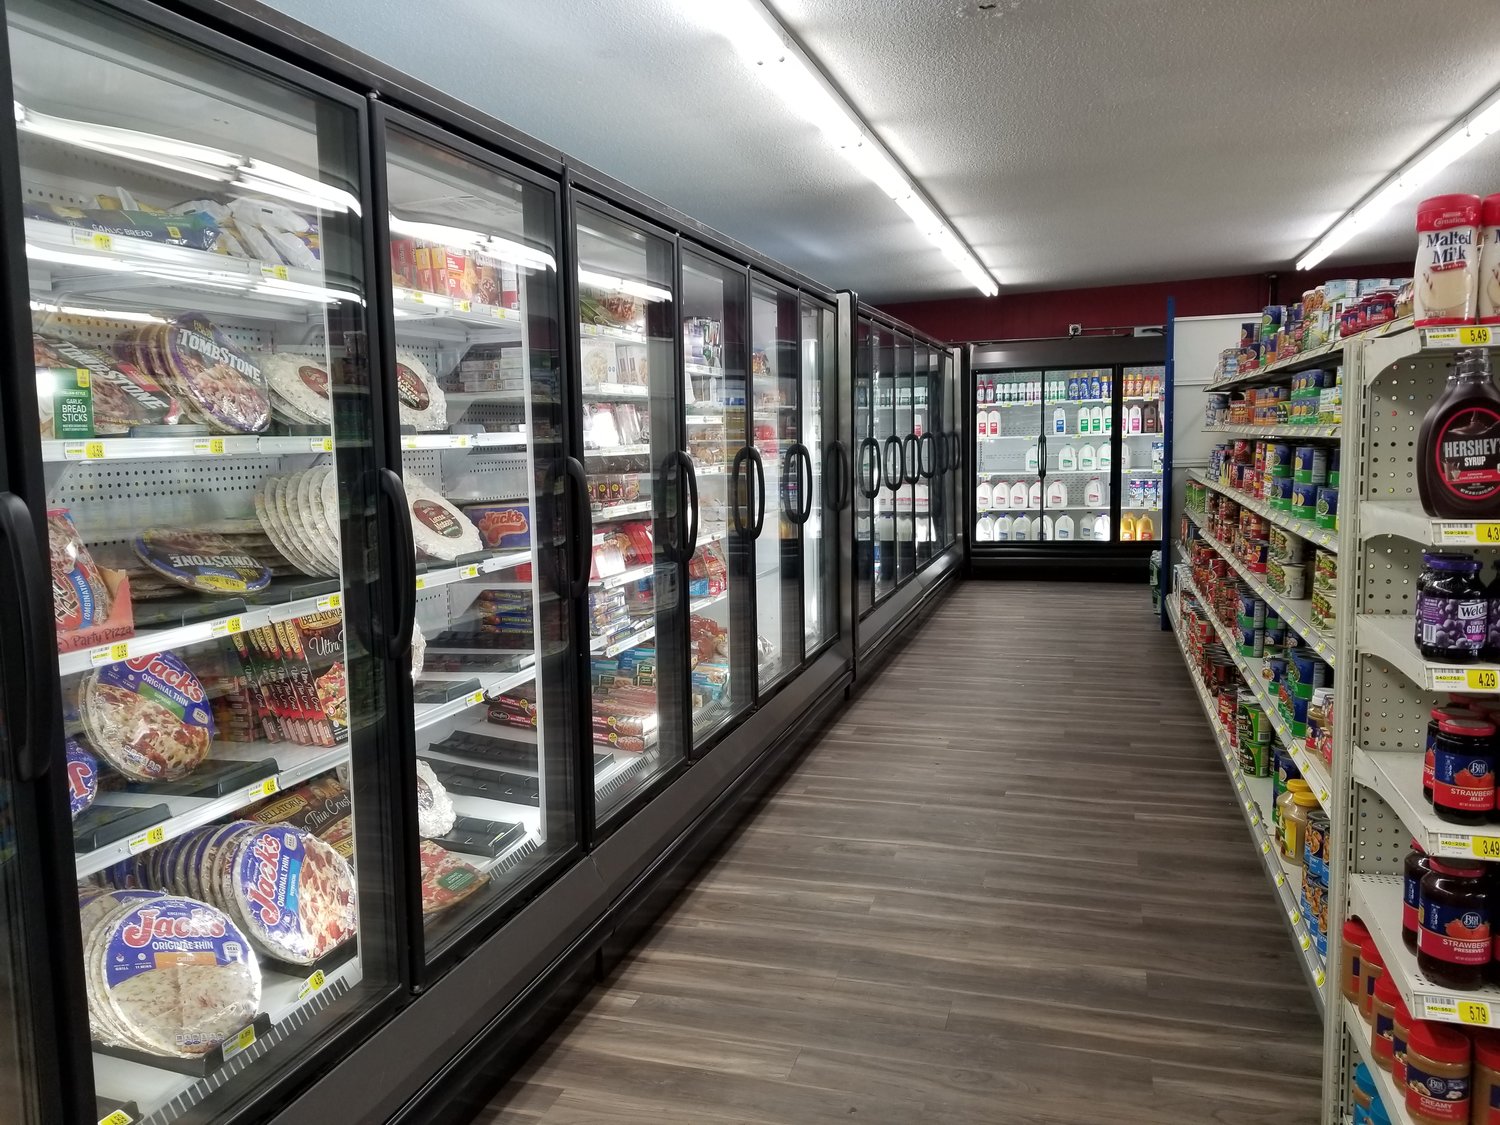 Large new coolers sit atop smooth, wood-look flooring inside the Goodhue Market grocery store.  Shelves of food and household necessities now run North and South creating a bit more room and an easy flow to shopping.